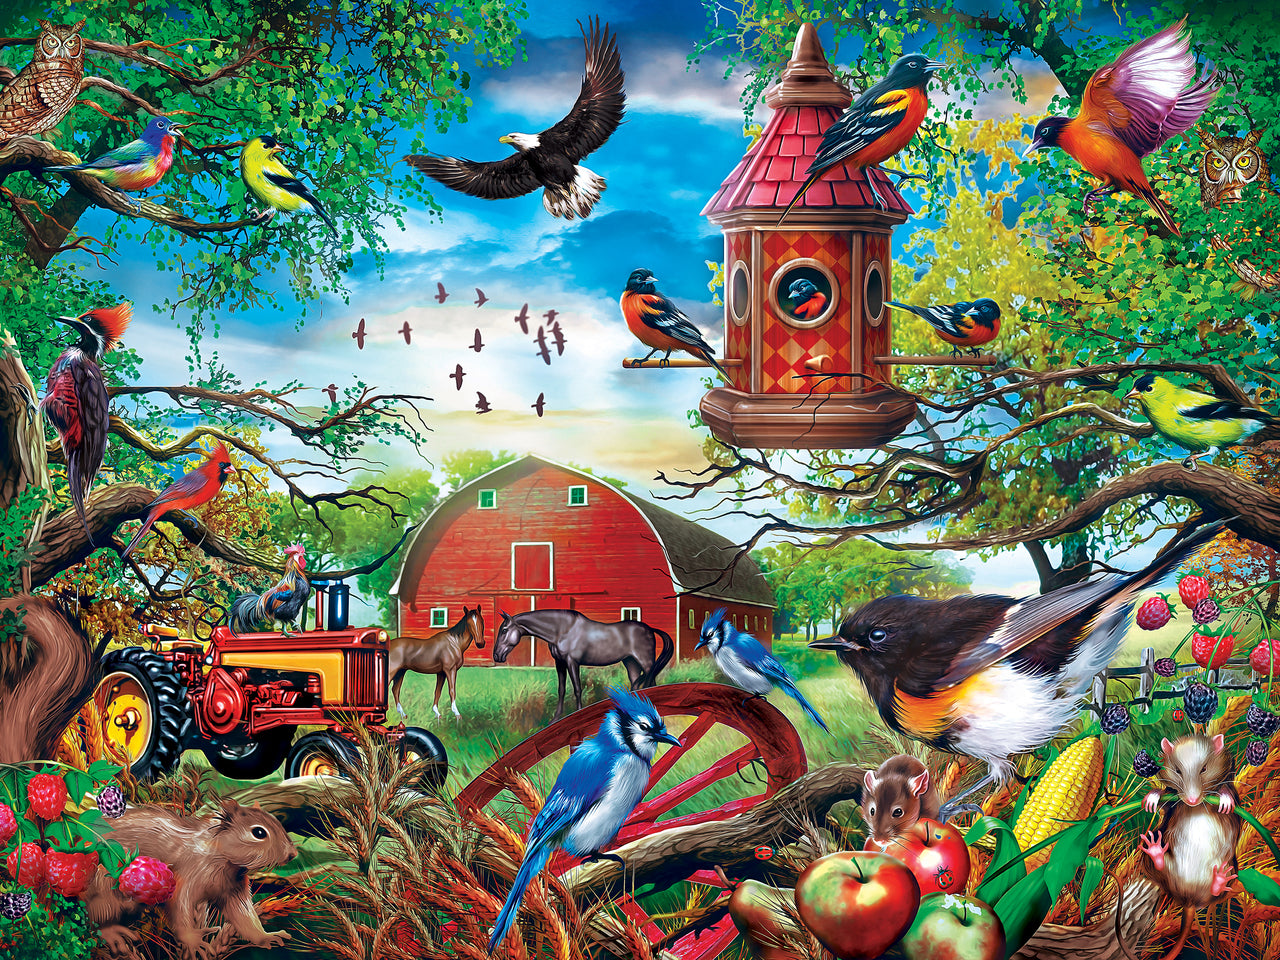 Green Acres Linen - Farmland Frolic Large 300 Piece EZGrip Jigsaw Puzzle by Masterpieces